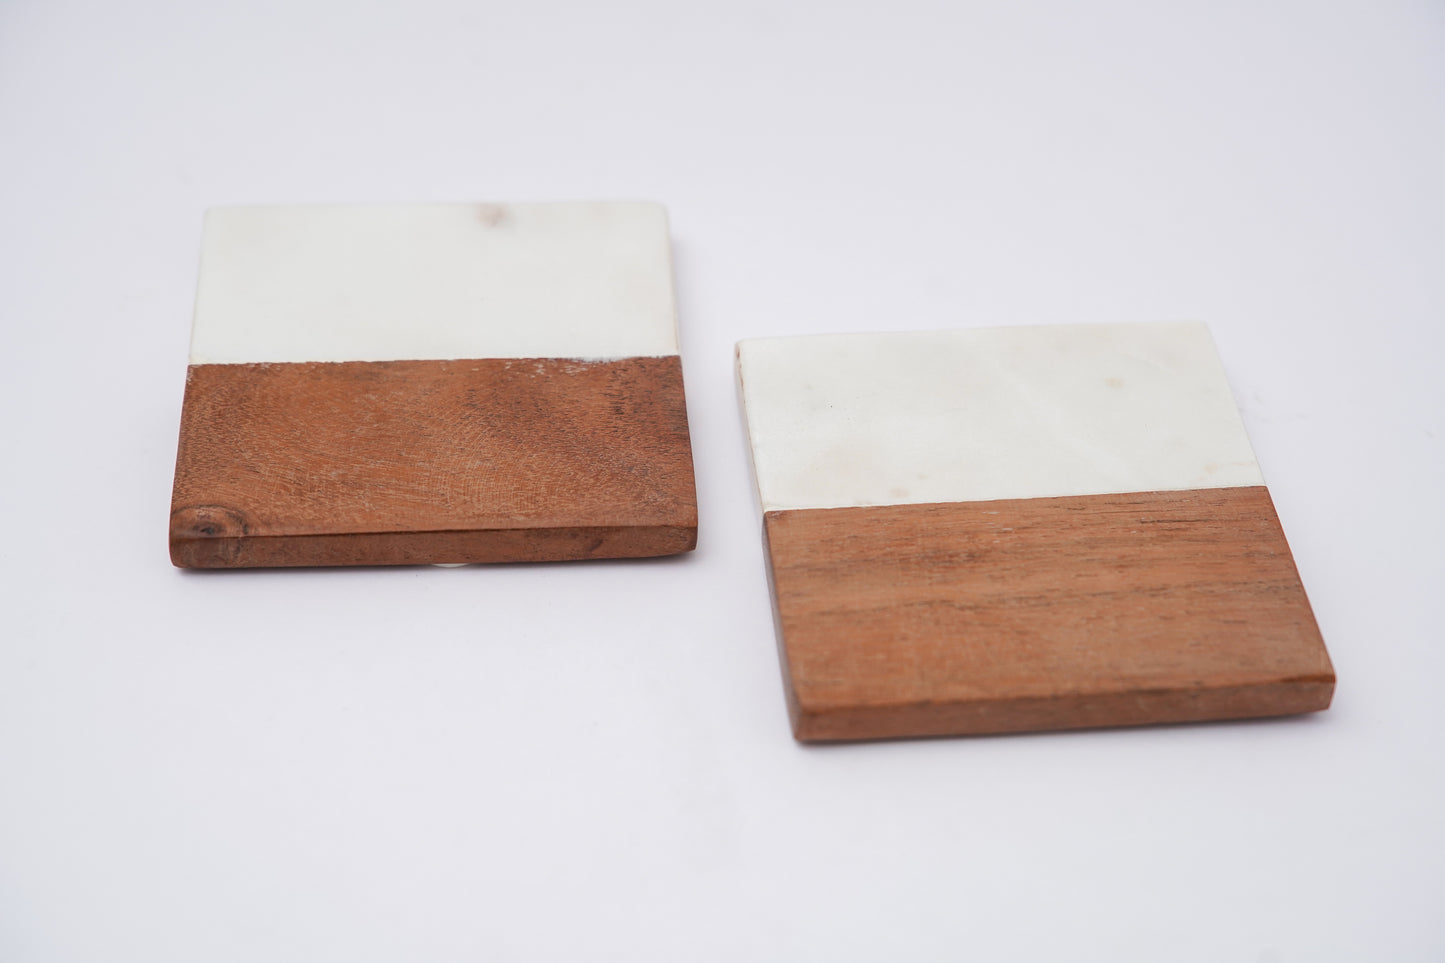 Marble and Wood Coaster Set of 2 for Tea Coffee Cocktail Handmade Marble Coaster for Hot & Cold Drinks Coaster for Dining Table Home and Office Square- White